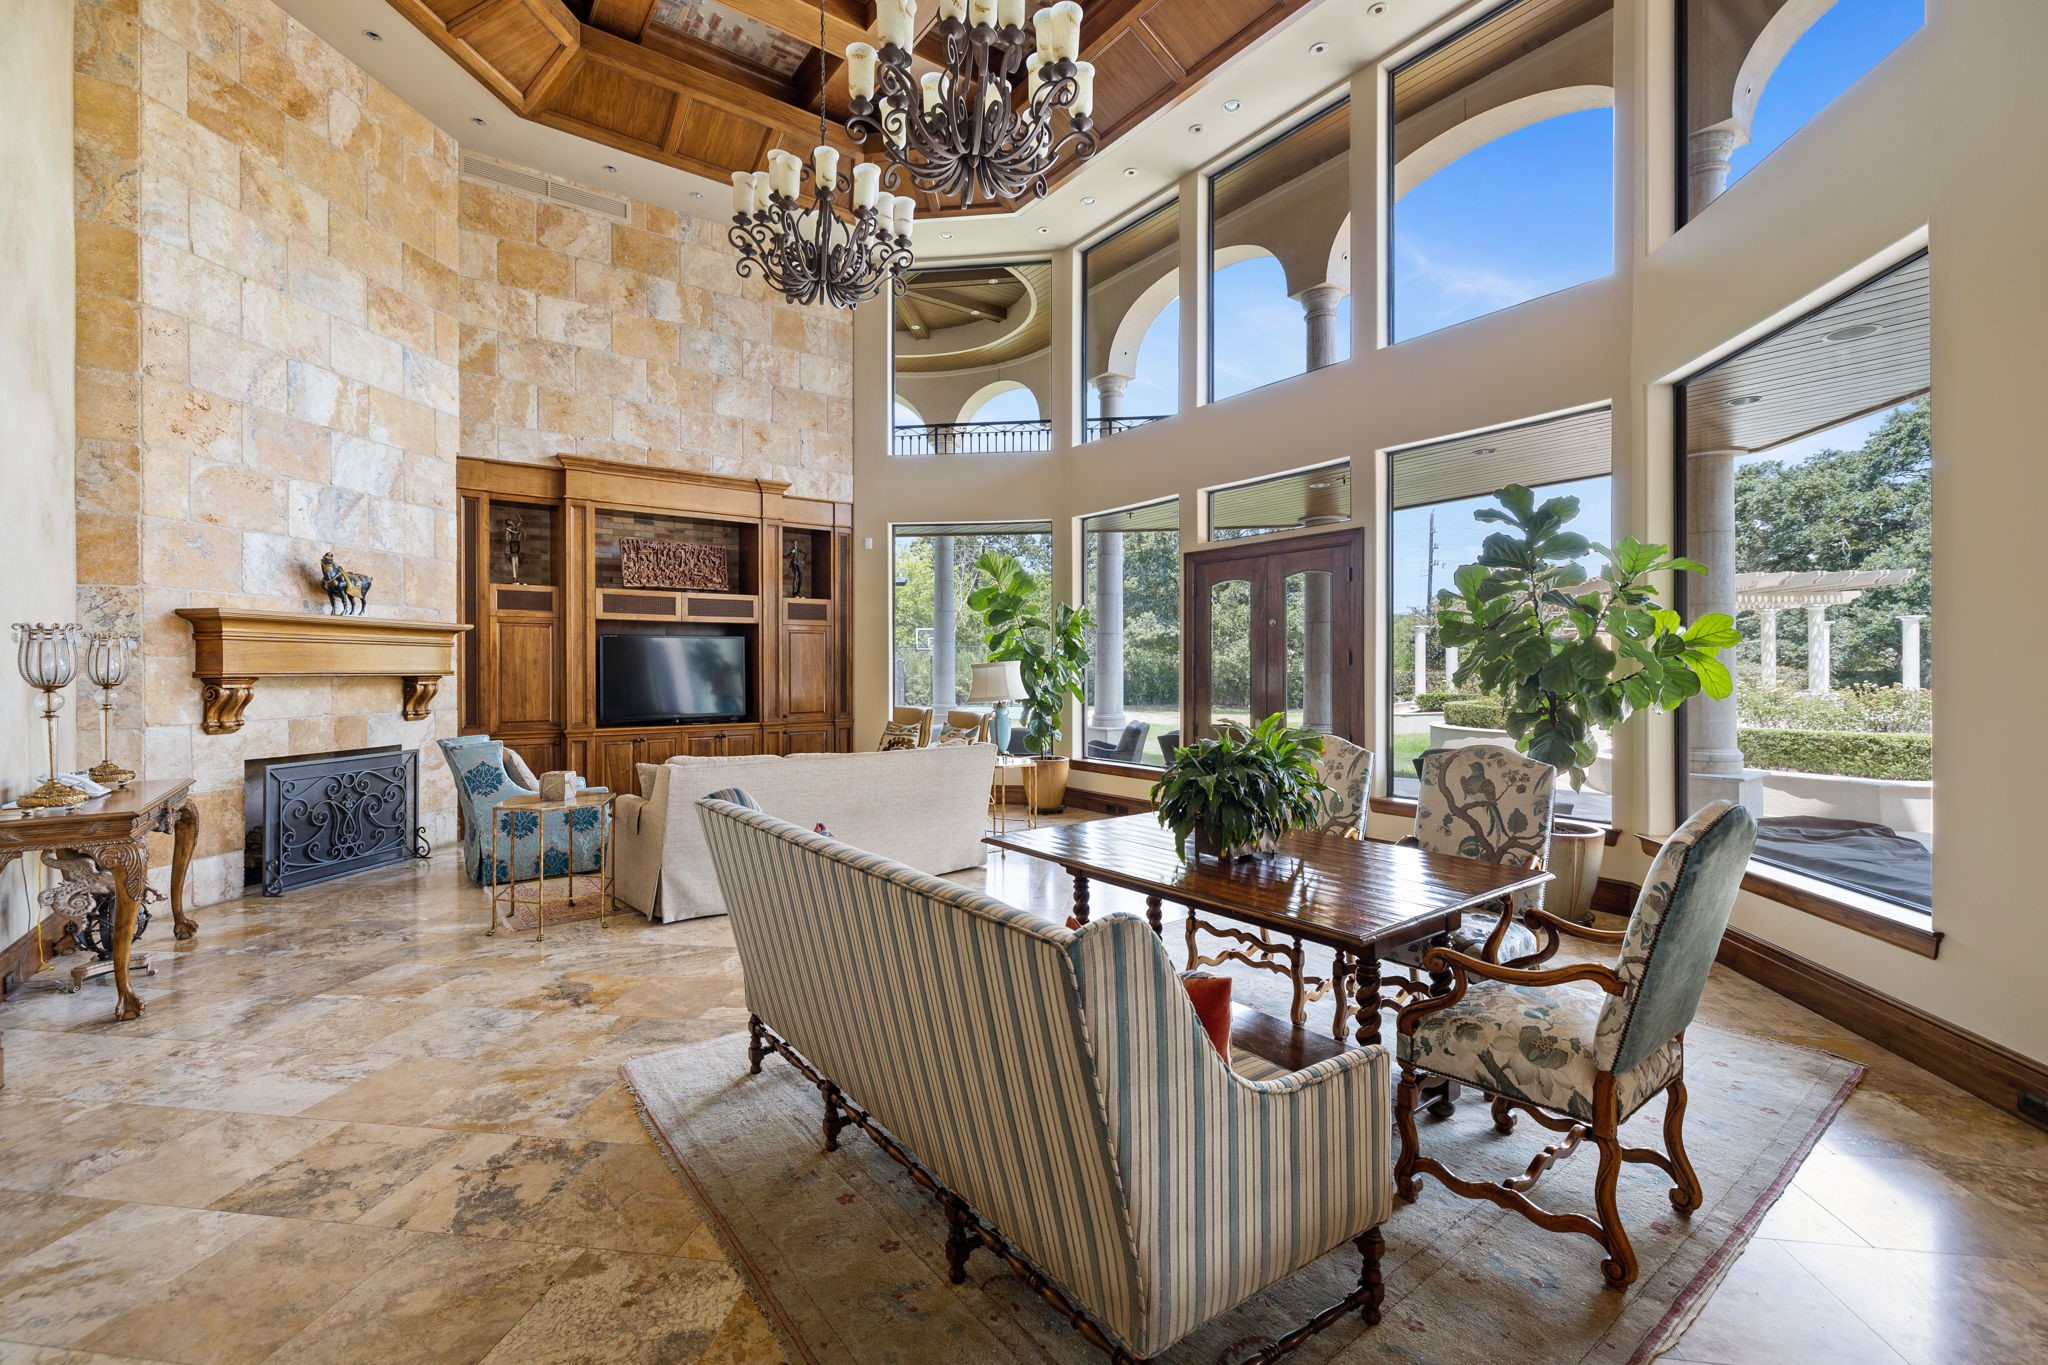 Now that we have been well fed, let us retreat to the Great Room with its tumbled stone accent wall and a gas log Fireplace accentuated with a stately mantle, entertainment center and rustic stonework.